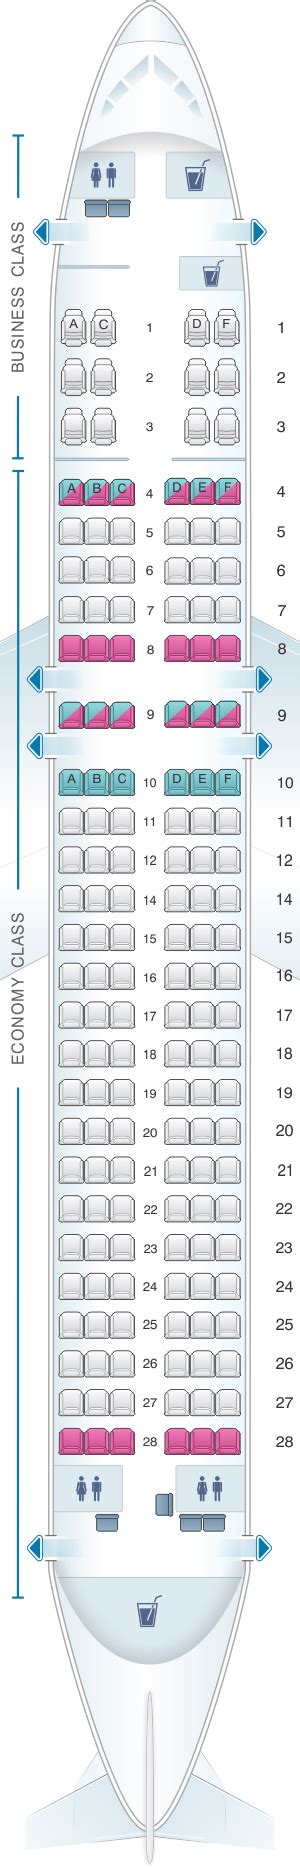 Philippine Airlines Seating Chart Seat Map Philippine Airlines Airbus